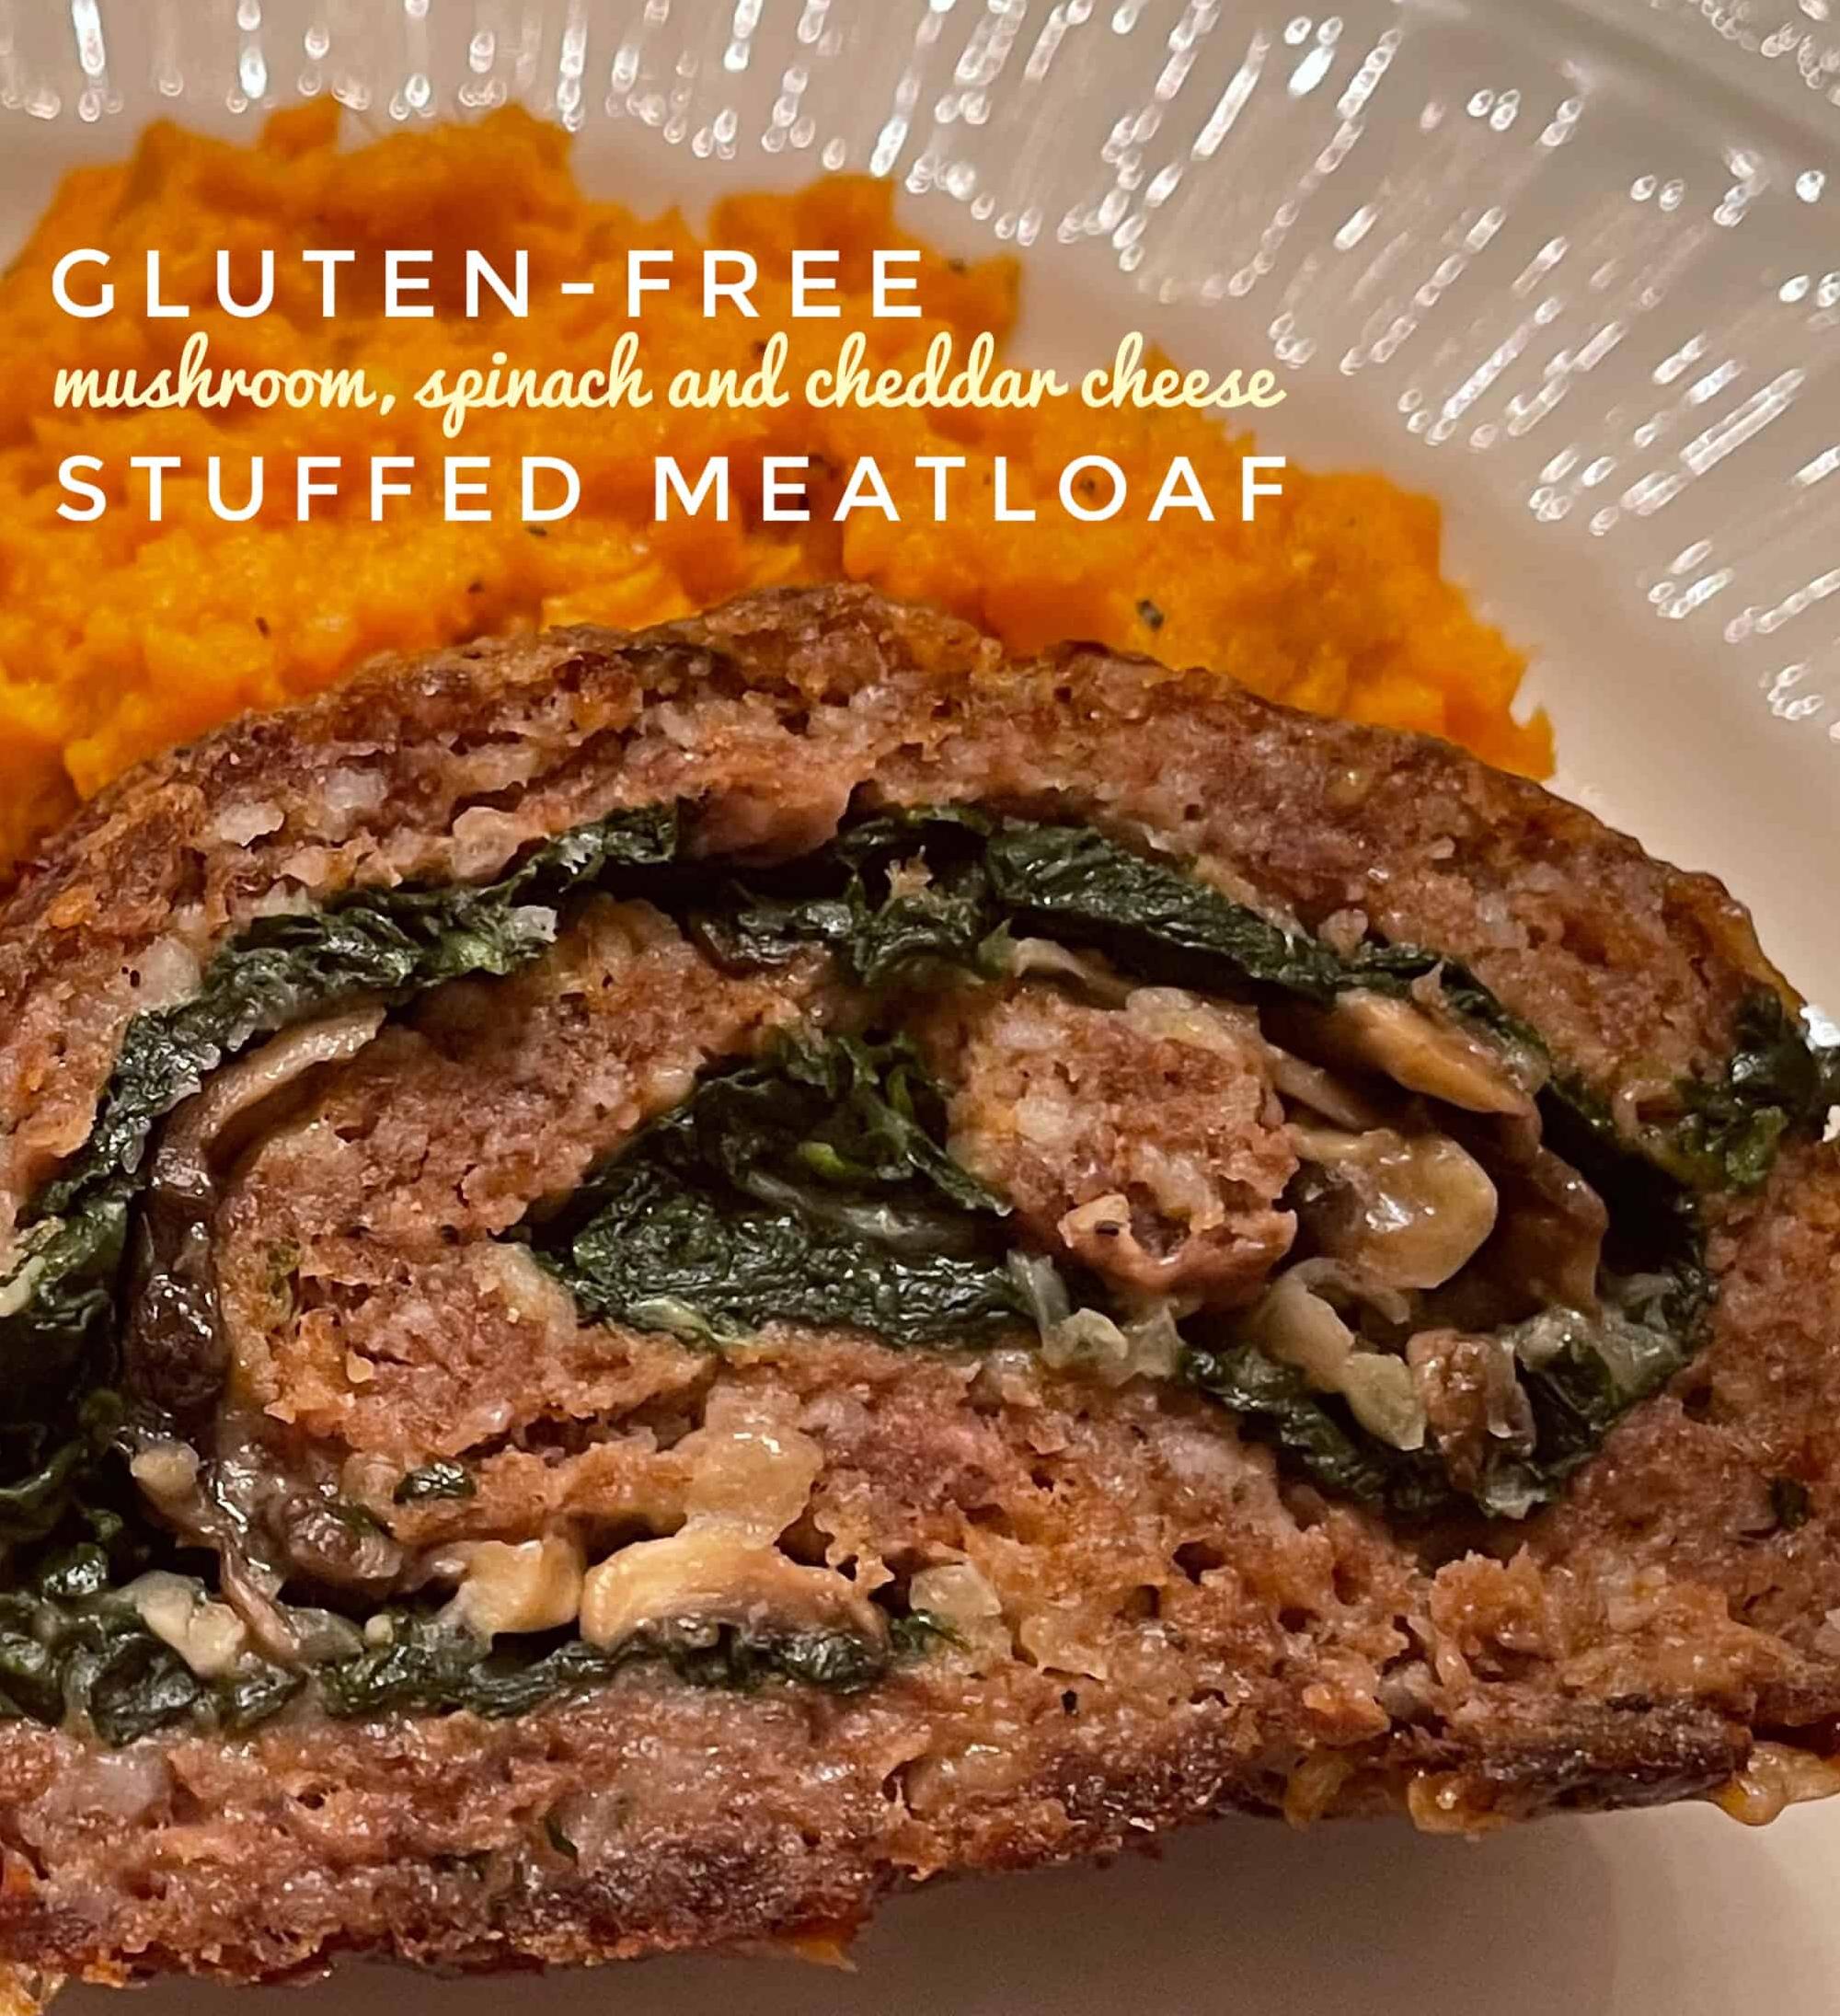  Gluten-free never looked so good!